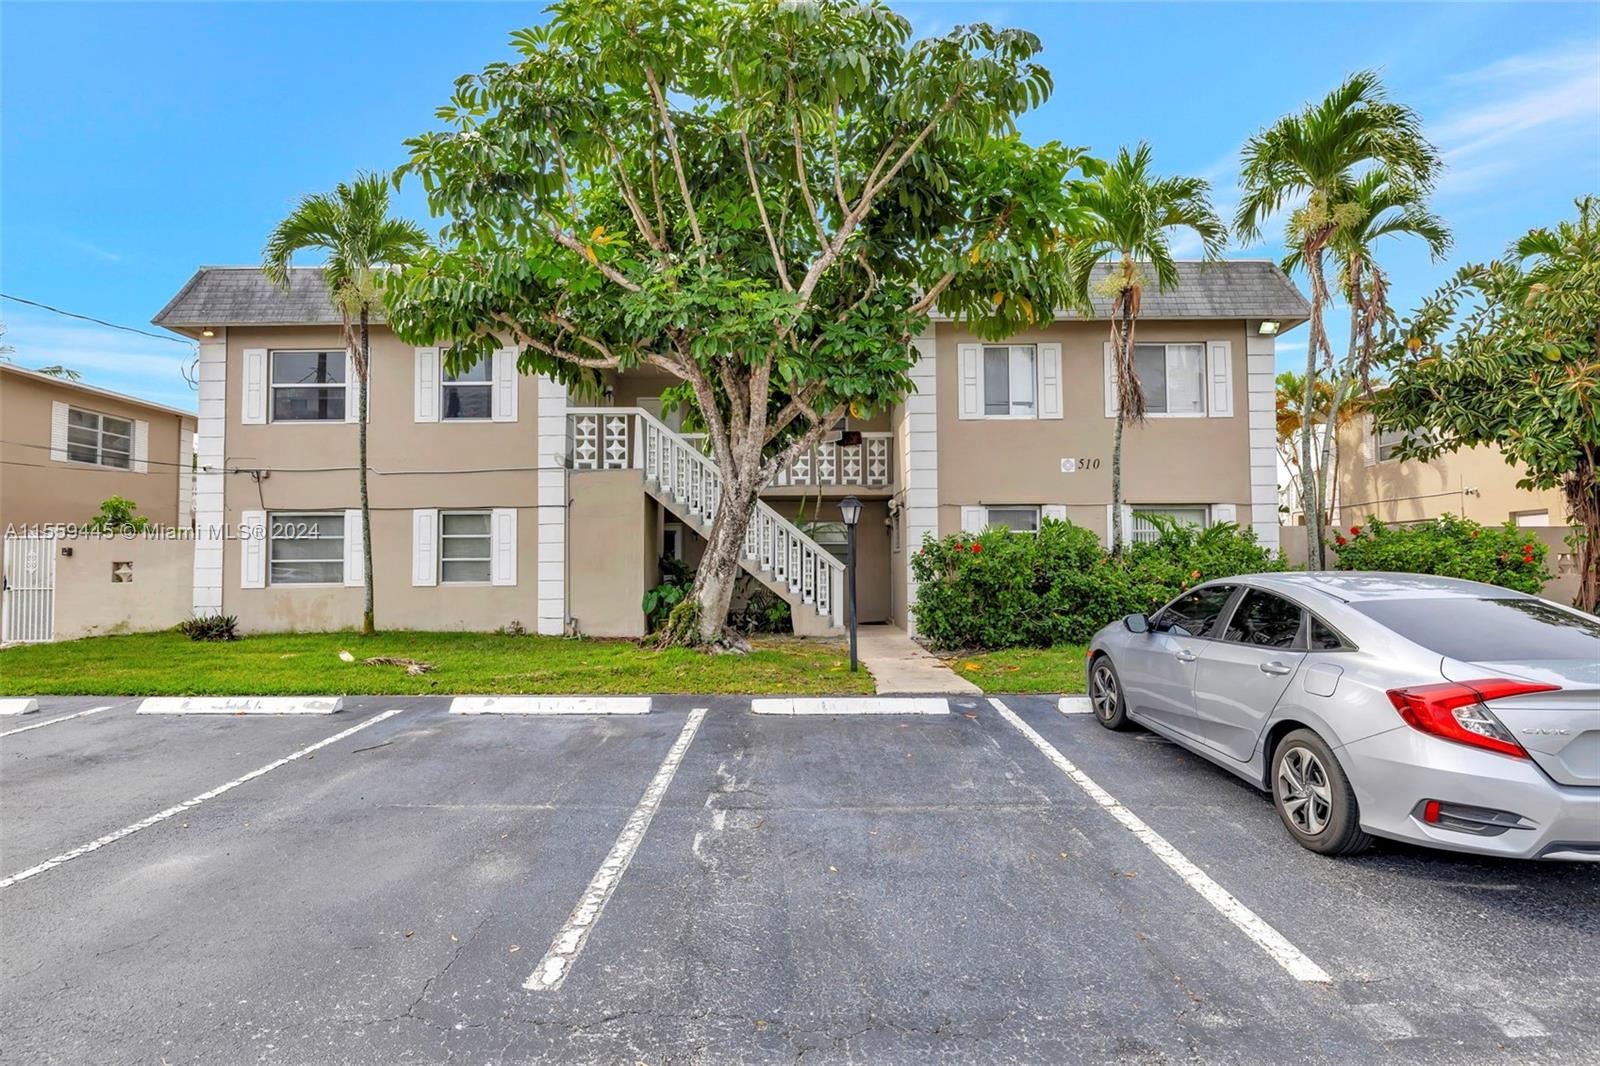 510 SW 15th St 105, Pompano Beach, Florida 33060, 1 Bedroom Bedrooms, ,1 BathroomBathrooms,Residential,For Sale,510 SW 15th St 105,A11559445